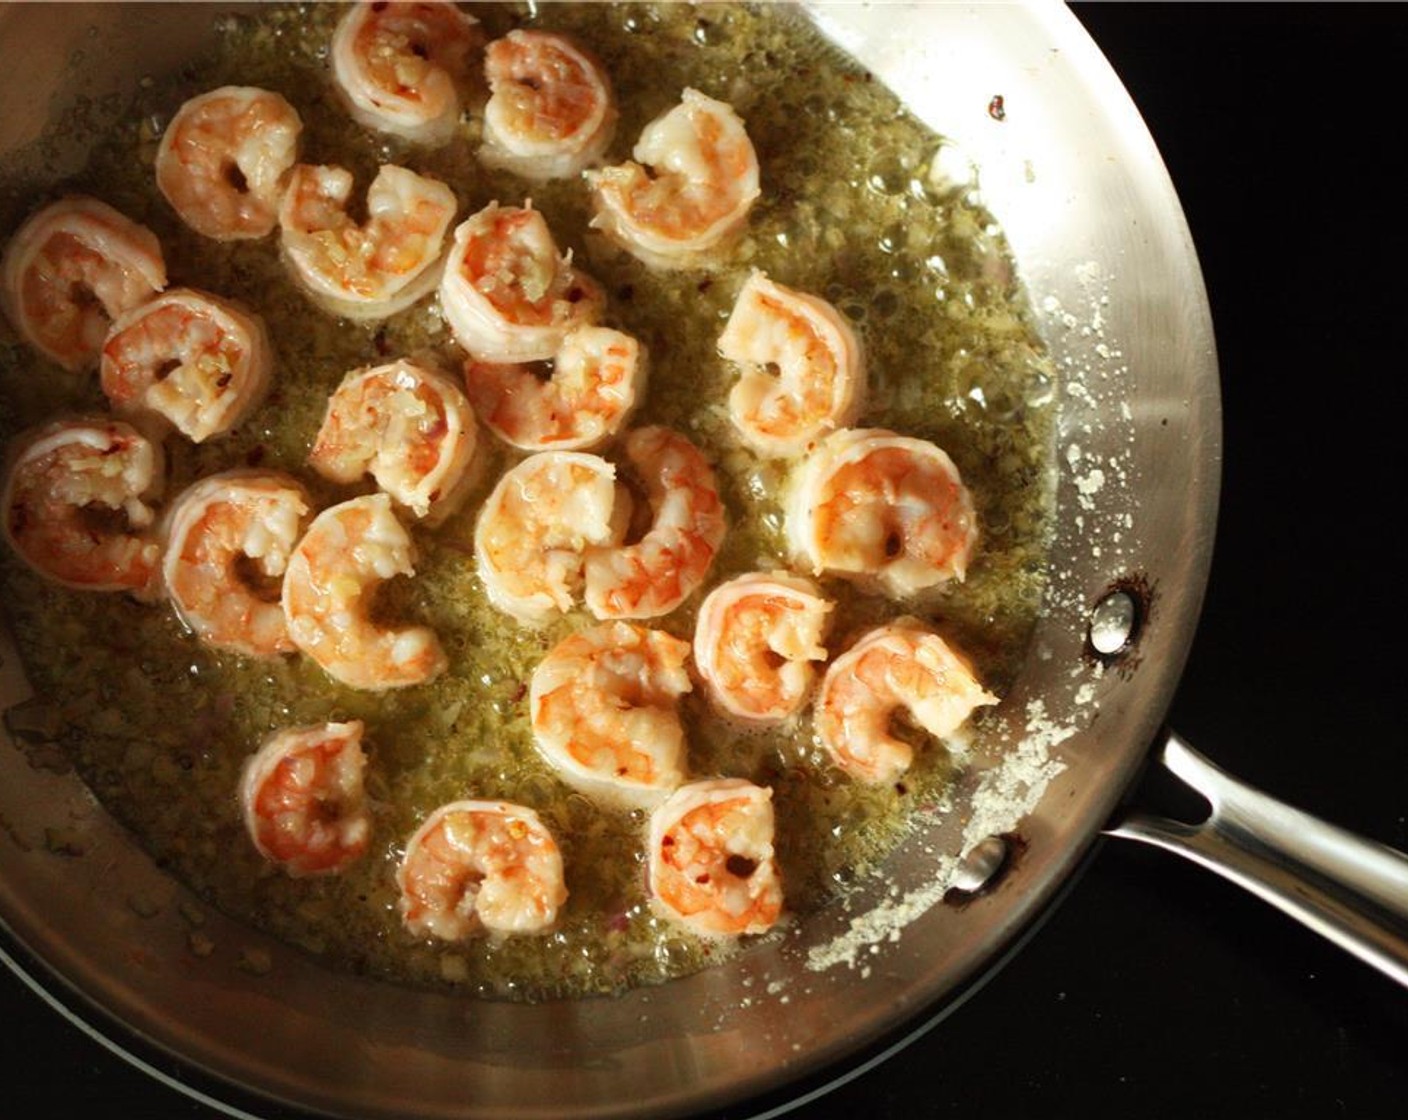 step 4 Add the shrimp, Salt (3/4 tsp) and Ground Black Pepper (1/2 tsp) to the frying pan and sauté for 3-4 minutes until the shrimp is pink and opaque on both sides.